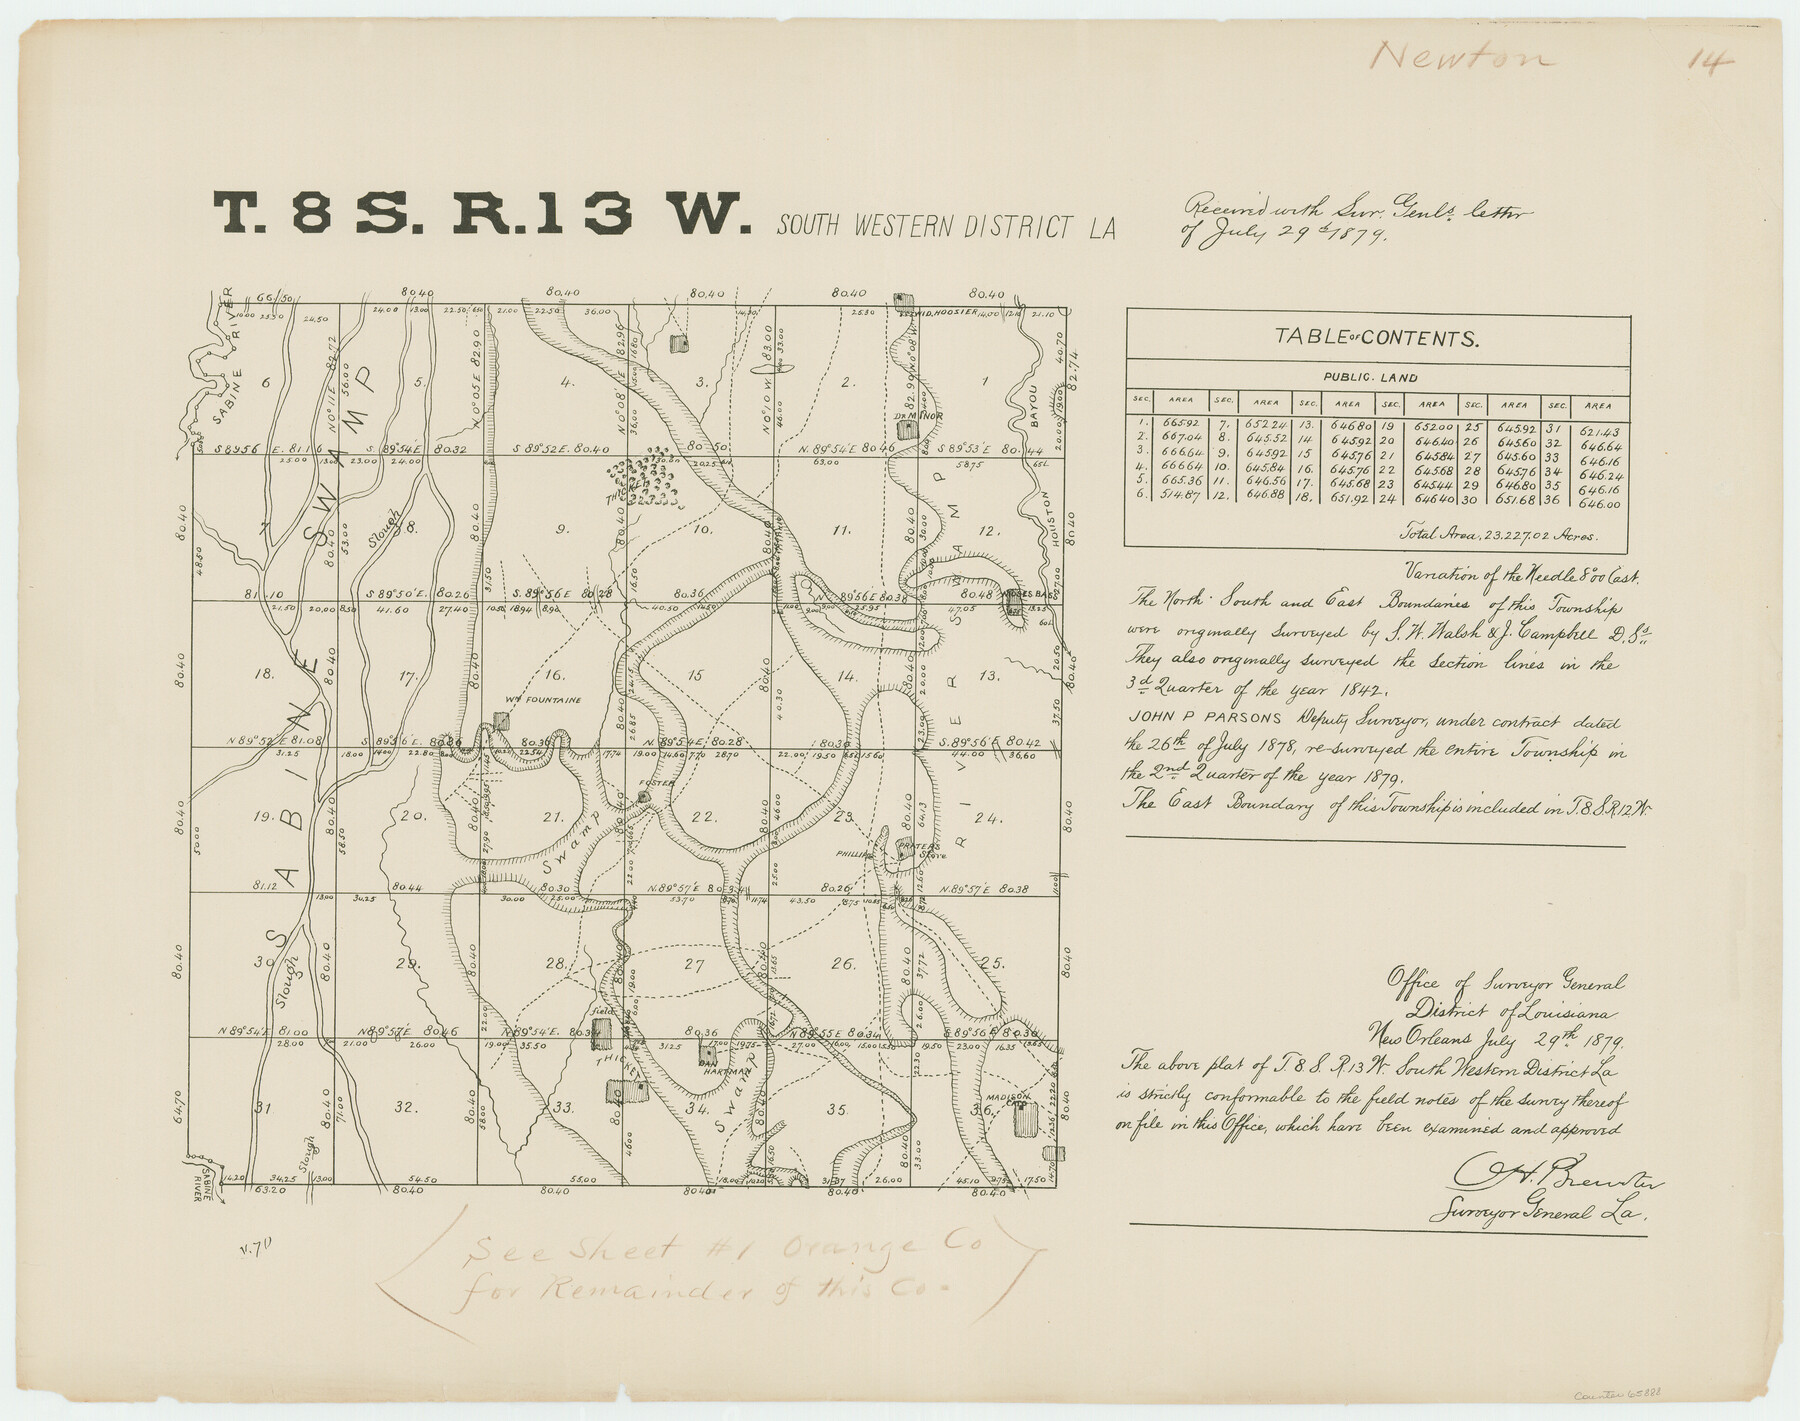 65888, Township 8 South Range 13 West, South Western District, Louisiana, General Map Collection